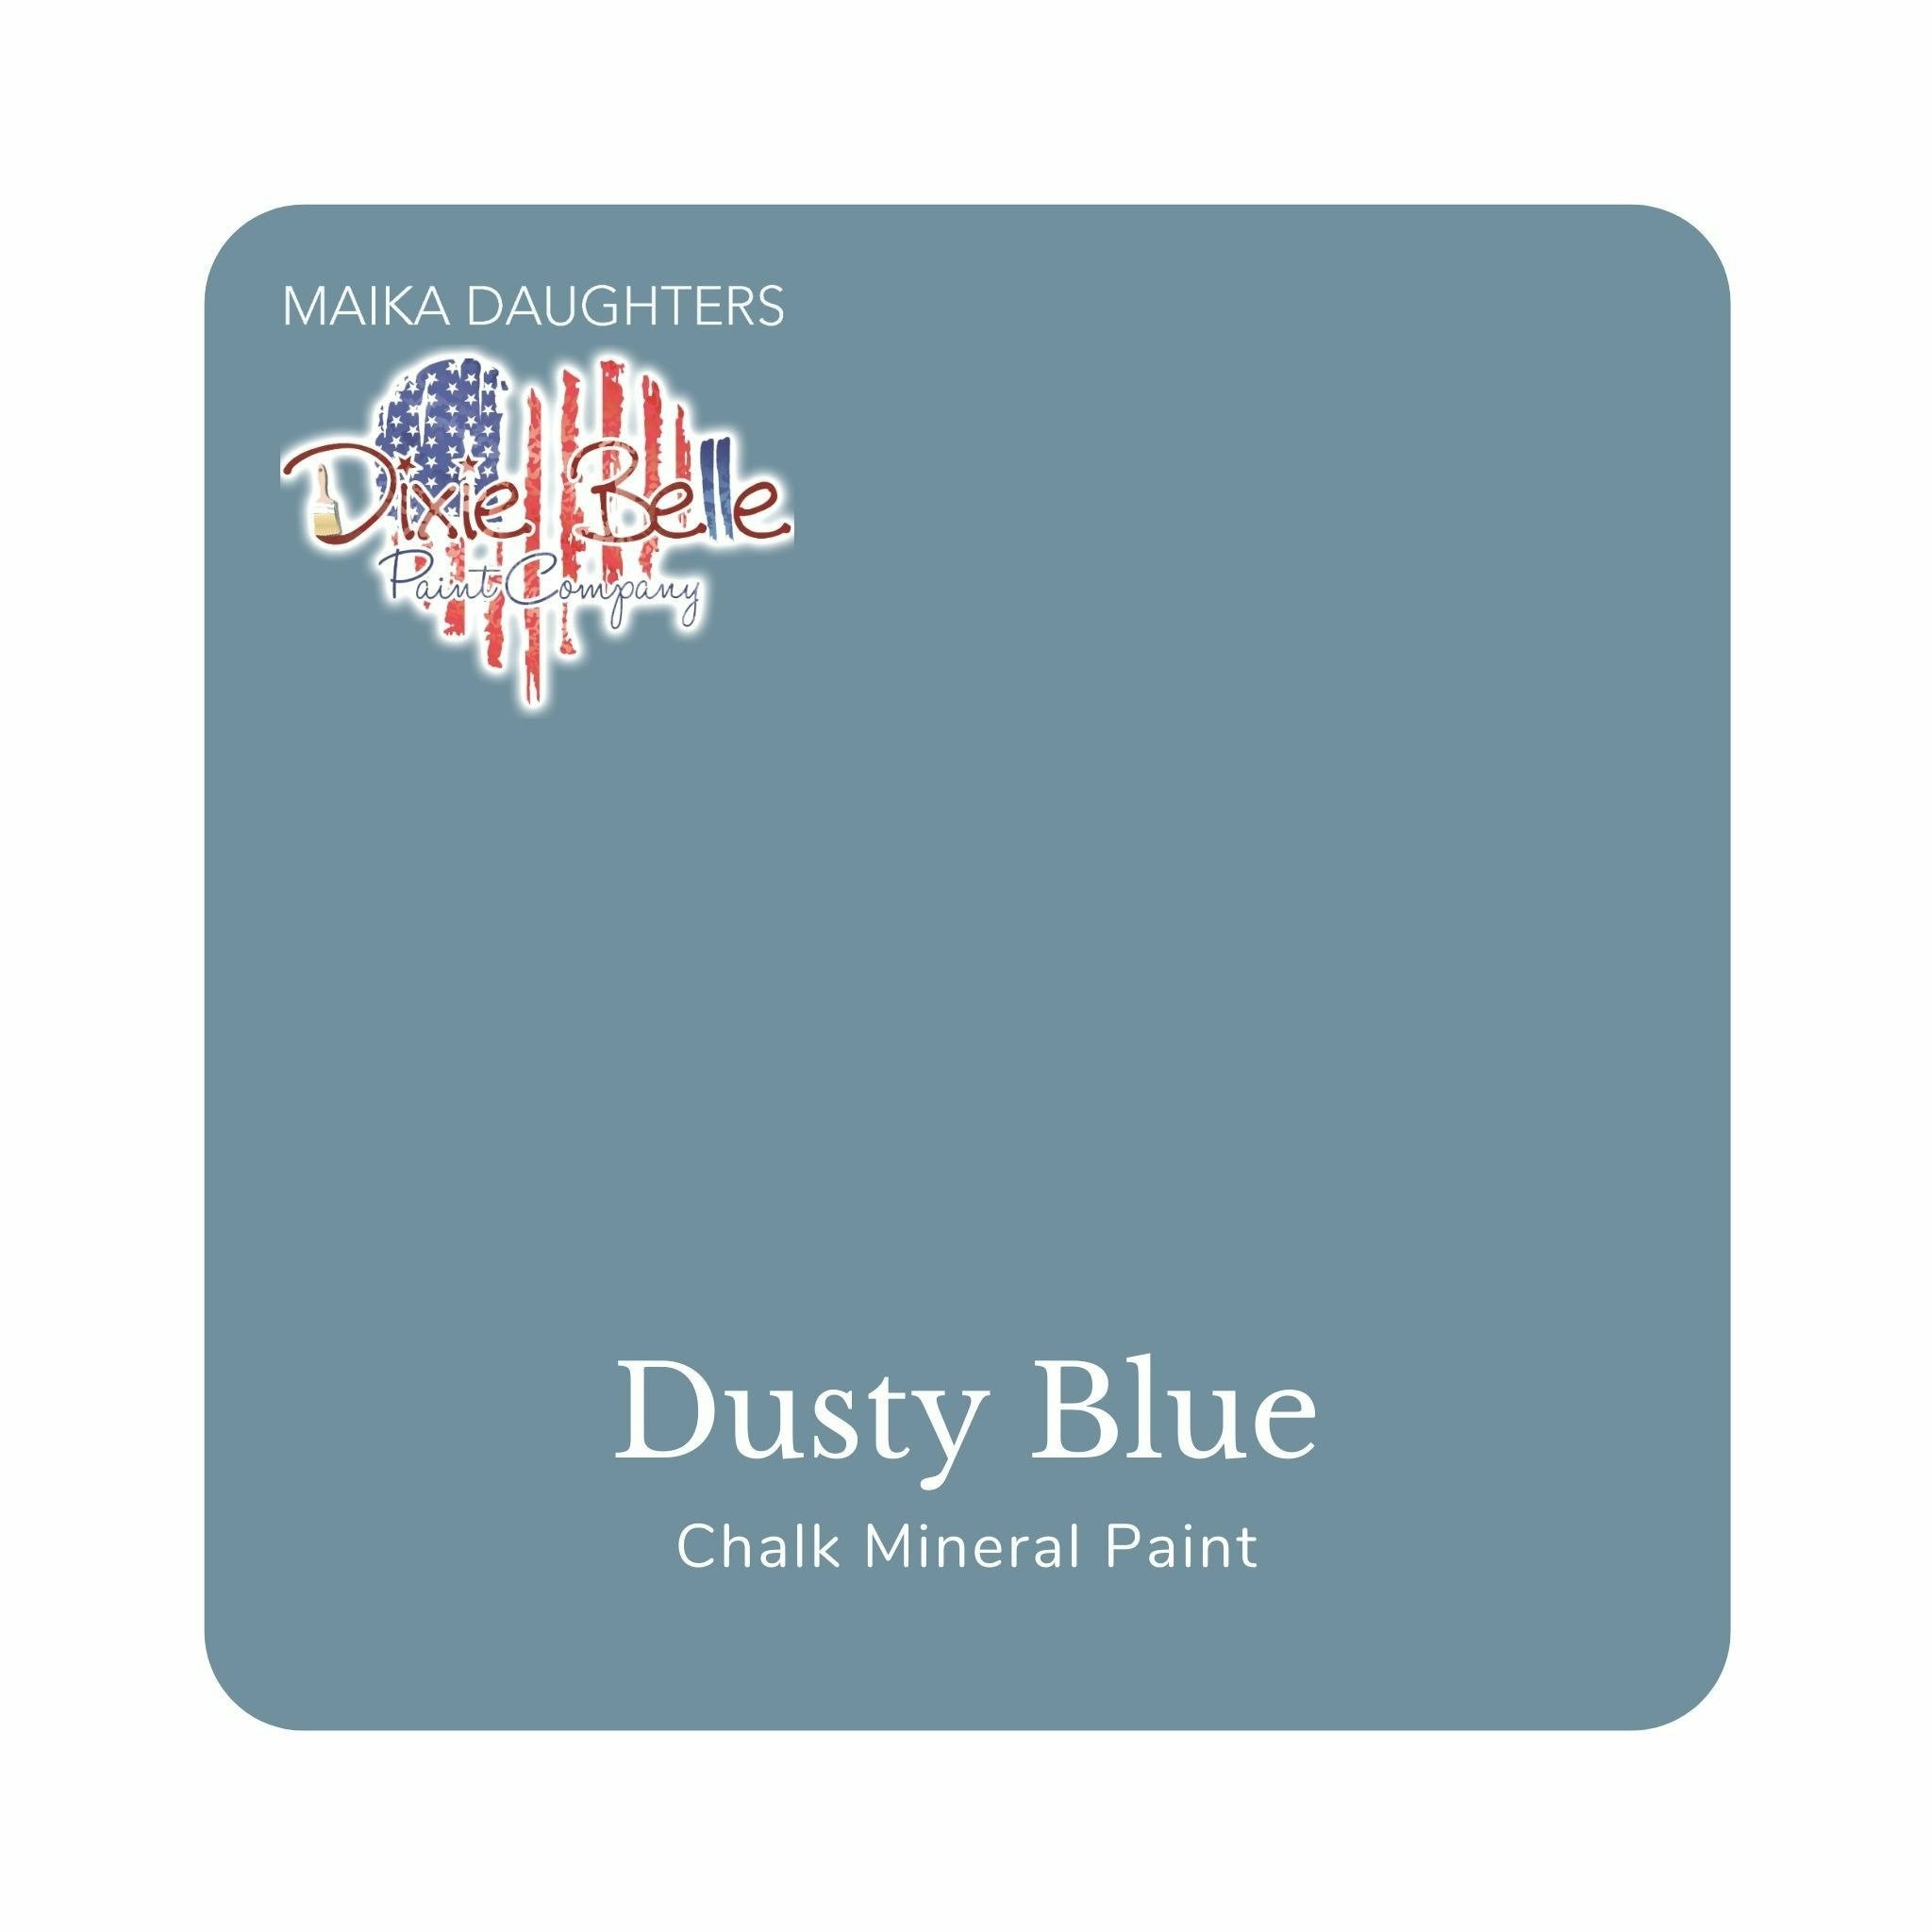 A square swatch card of Dixie Belle Paint Company’s Dusty Blue Chalk Mineral Paint is against a white background. This color is a light blue gray.